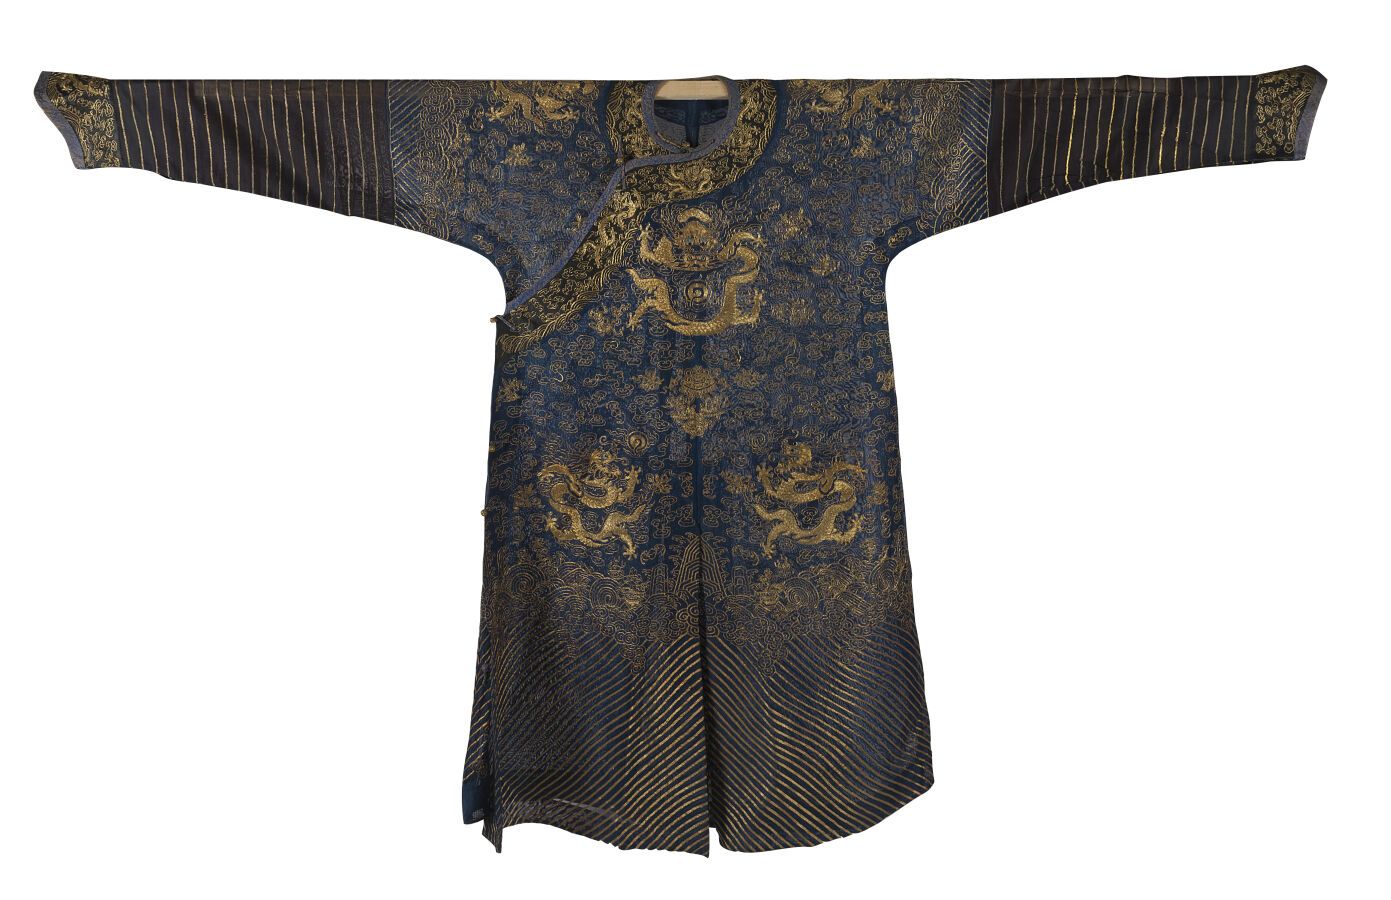 Null Summer dress in blue embroidered gauze
China, Guangxu period (1875-1908) 
D&hellip;